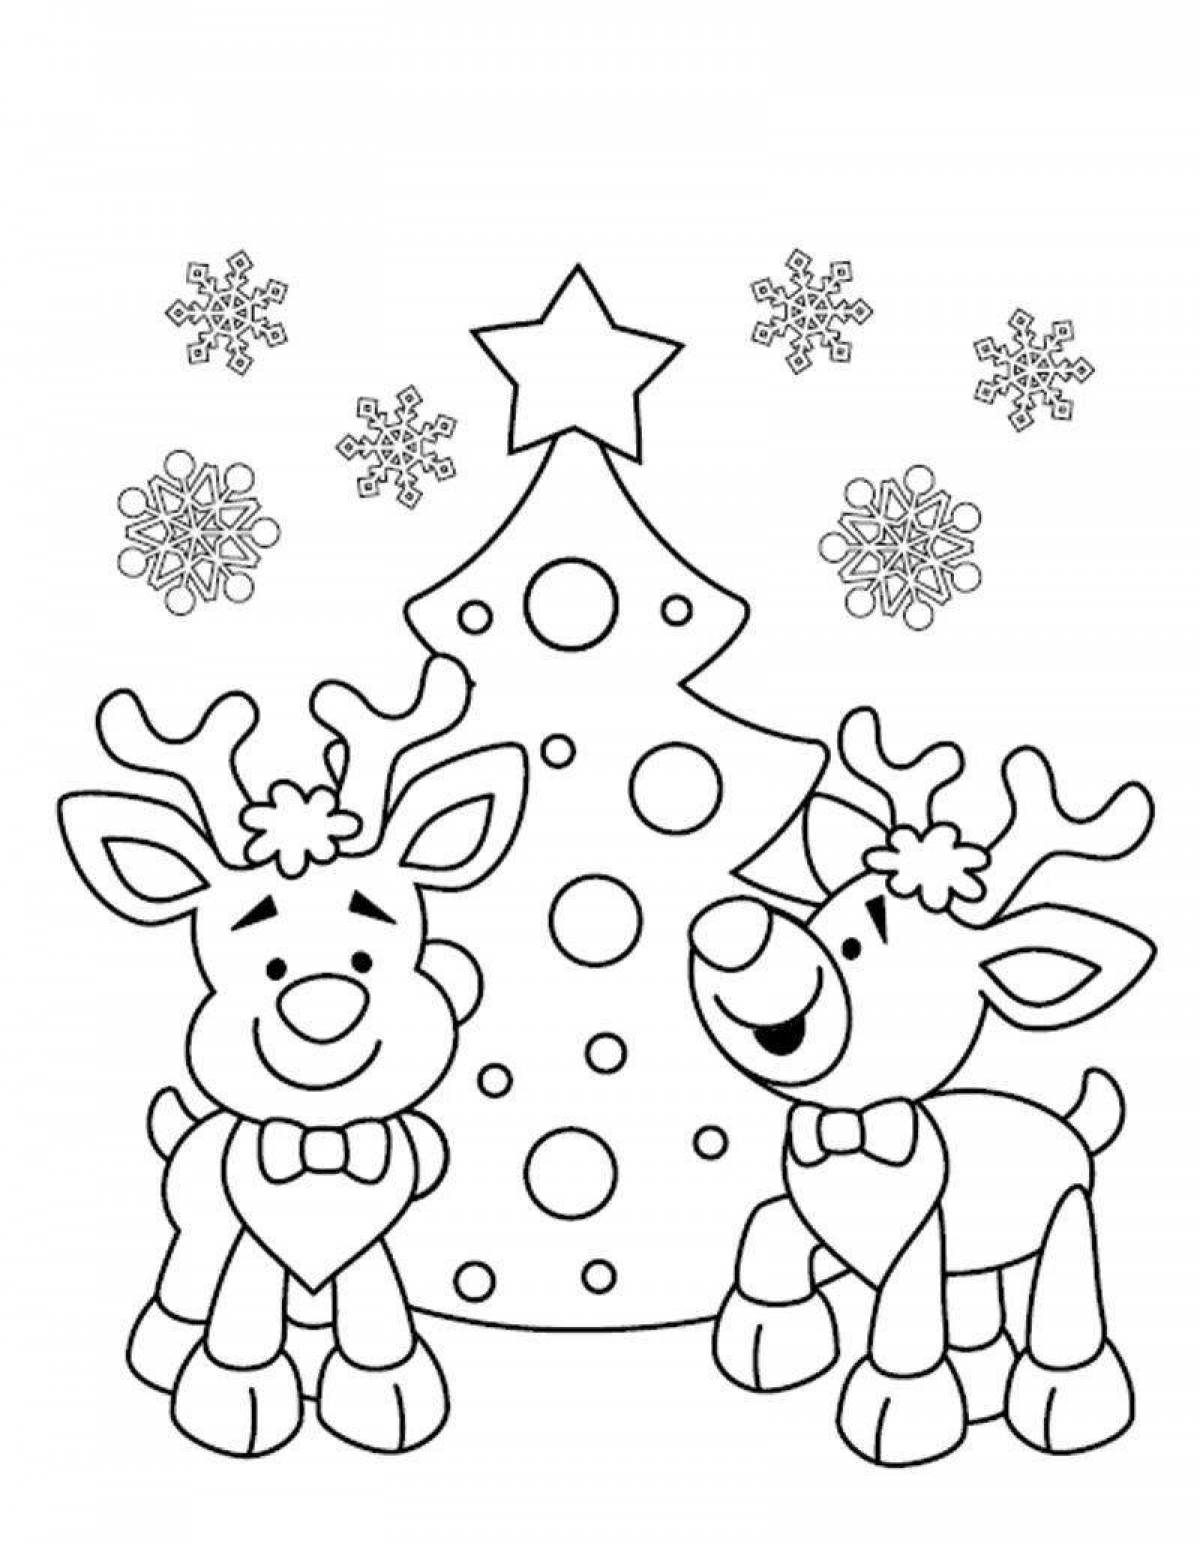 Jazzy new year simple coloring book